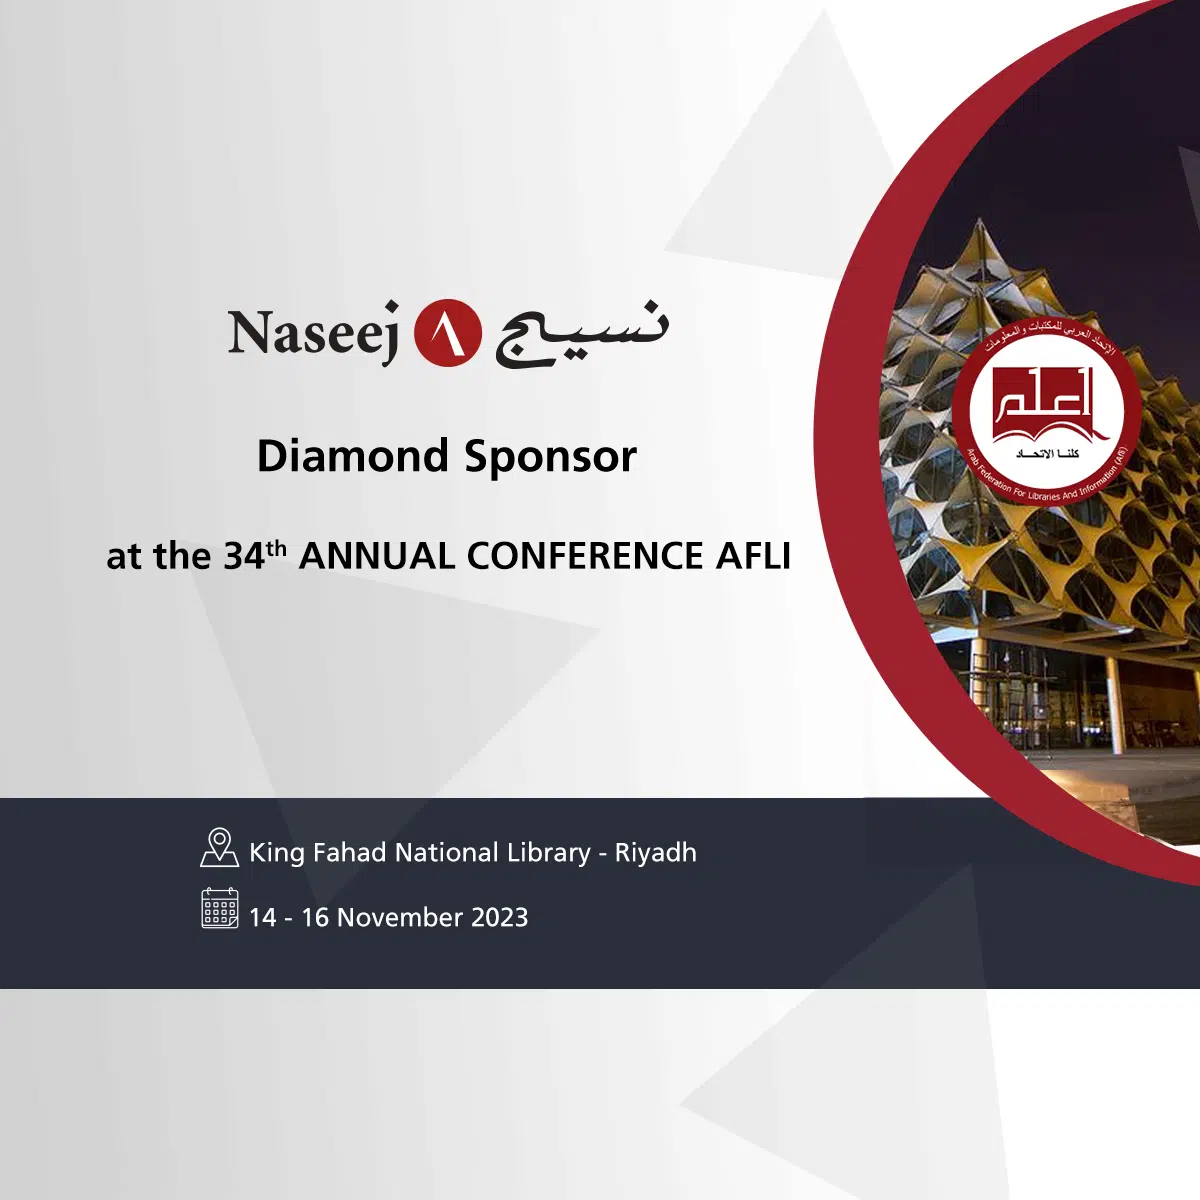 Naseej Diamond Sponsor of The 34th Arab Federation for Libraries and Information (AFLI) Conference